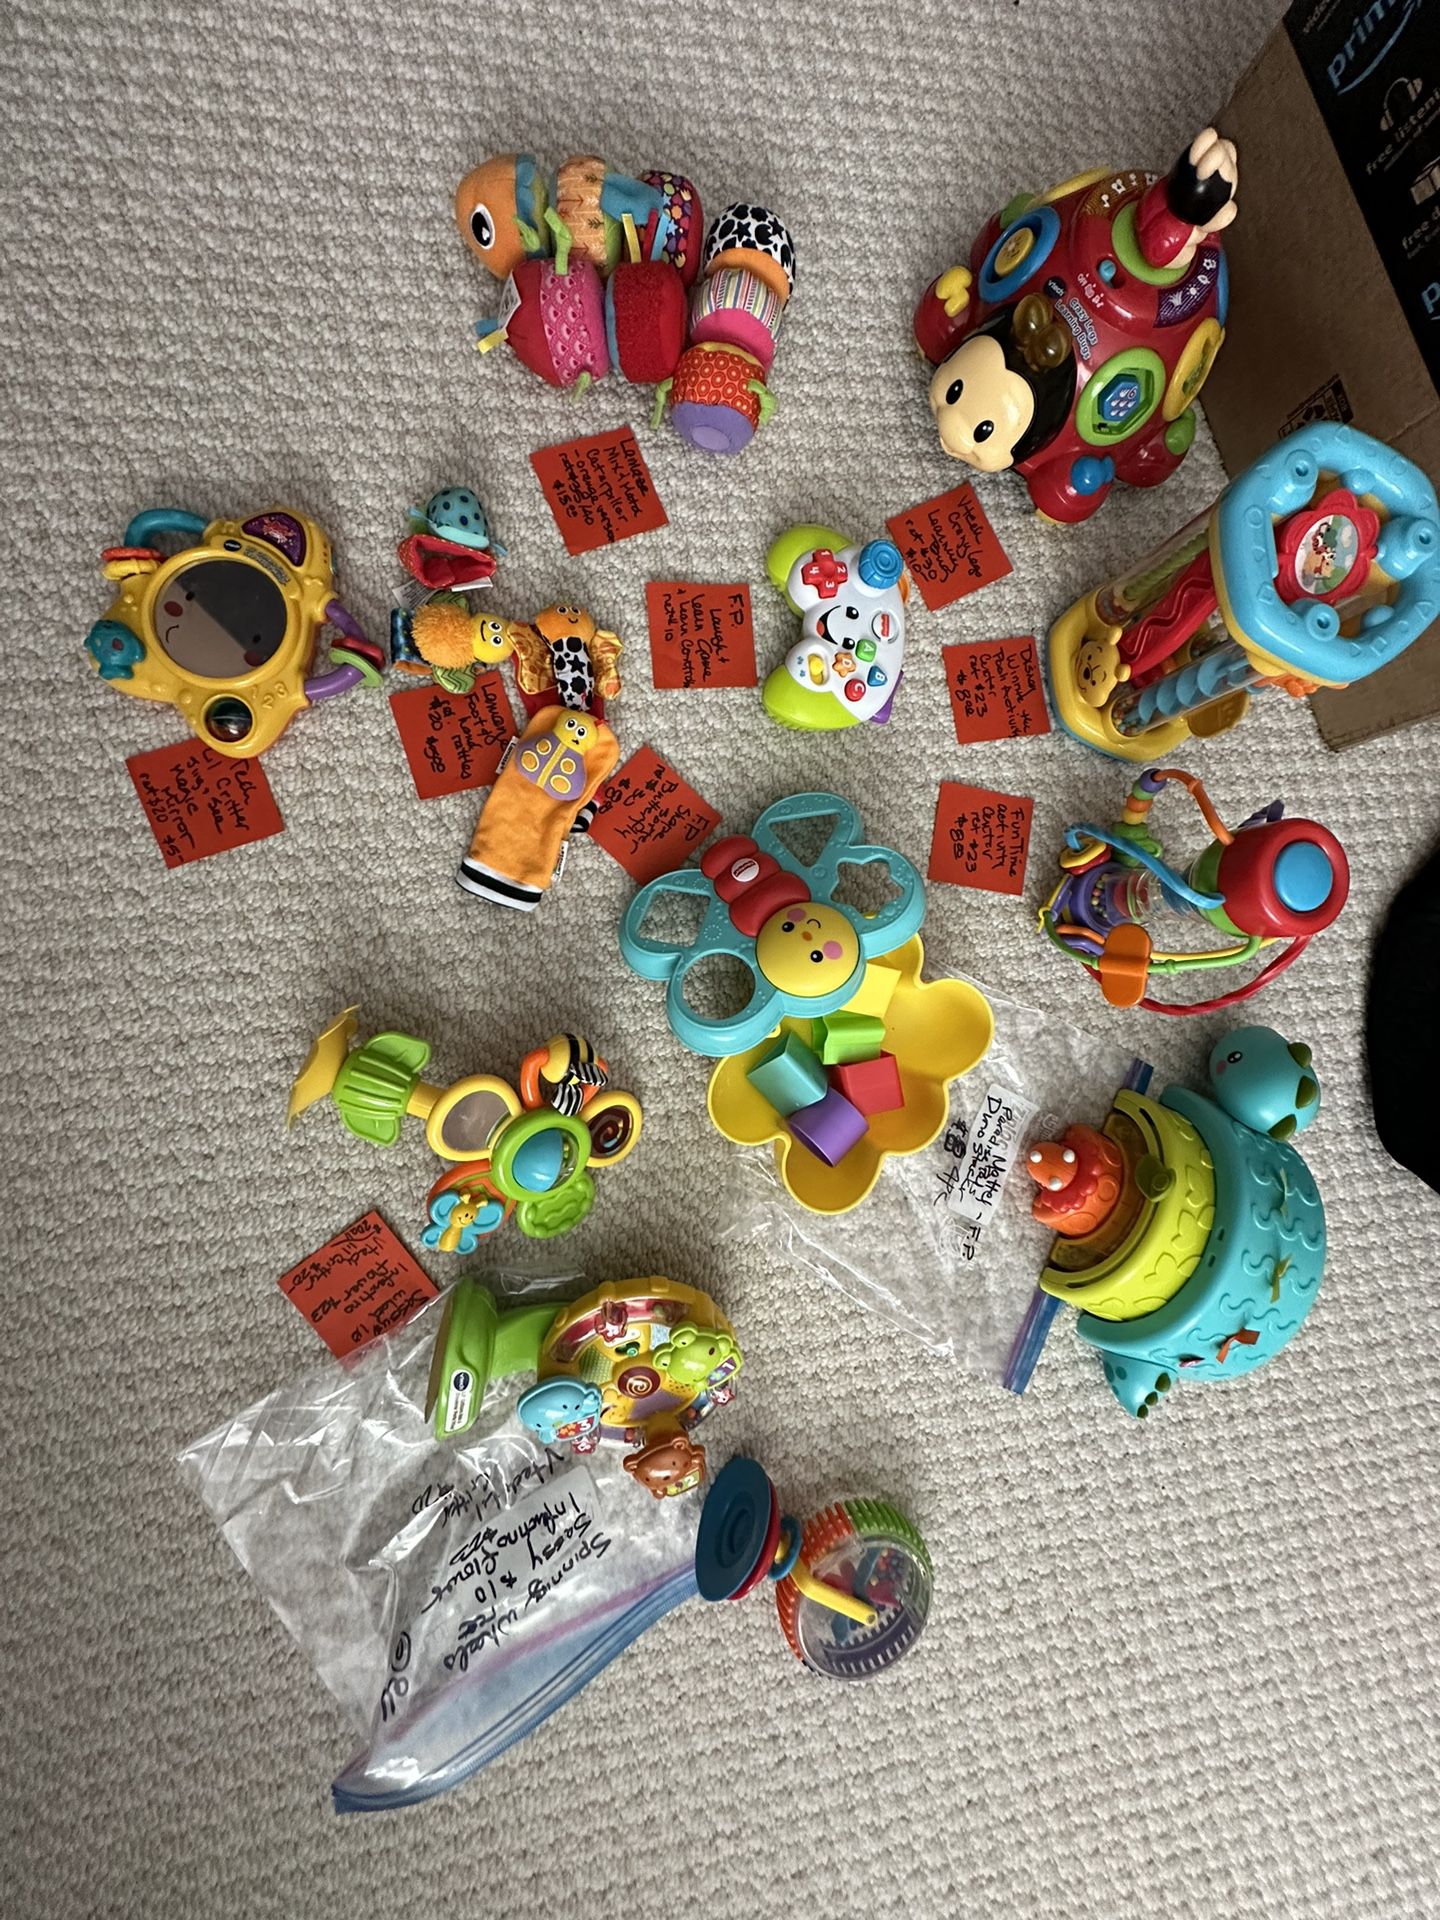 Lamaze, VTech, Fisher-Price assorted toys Priced Individually 